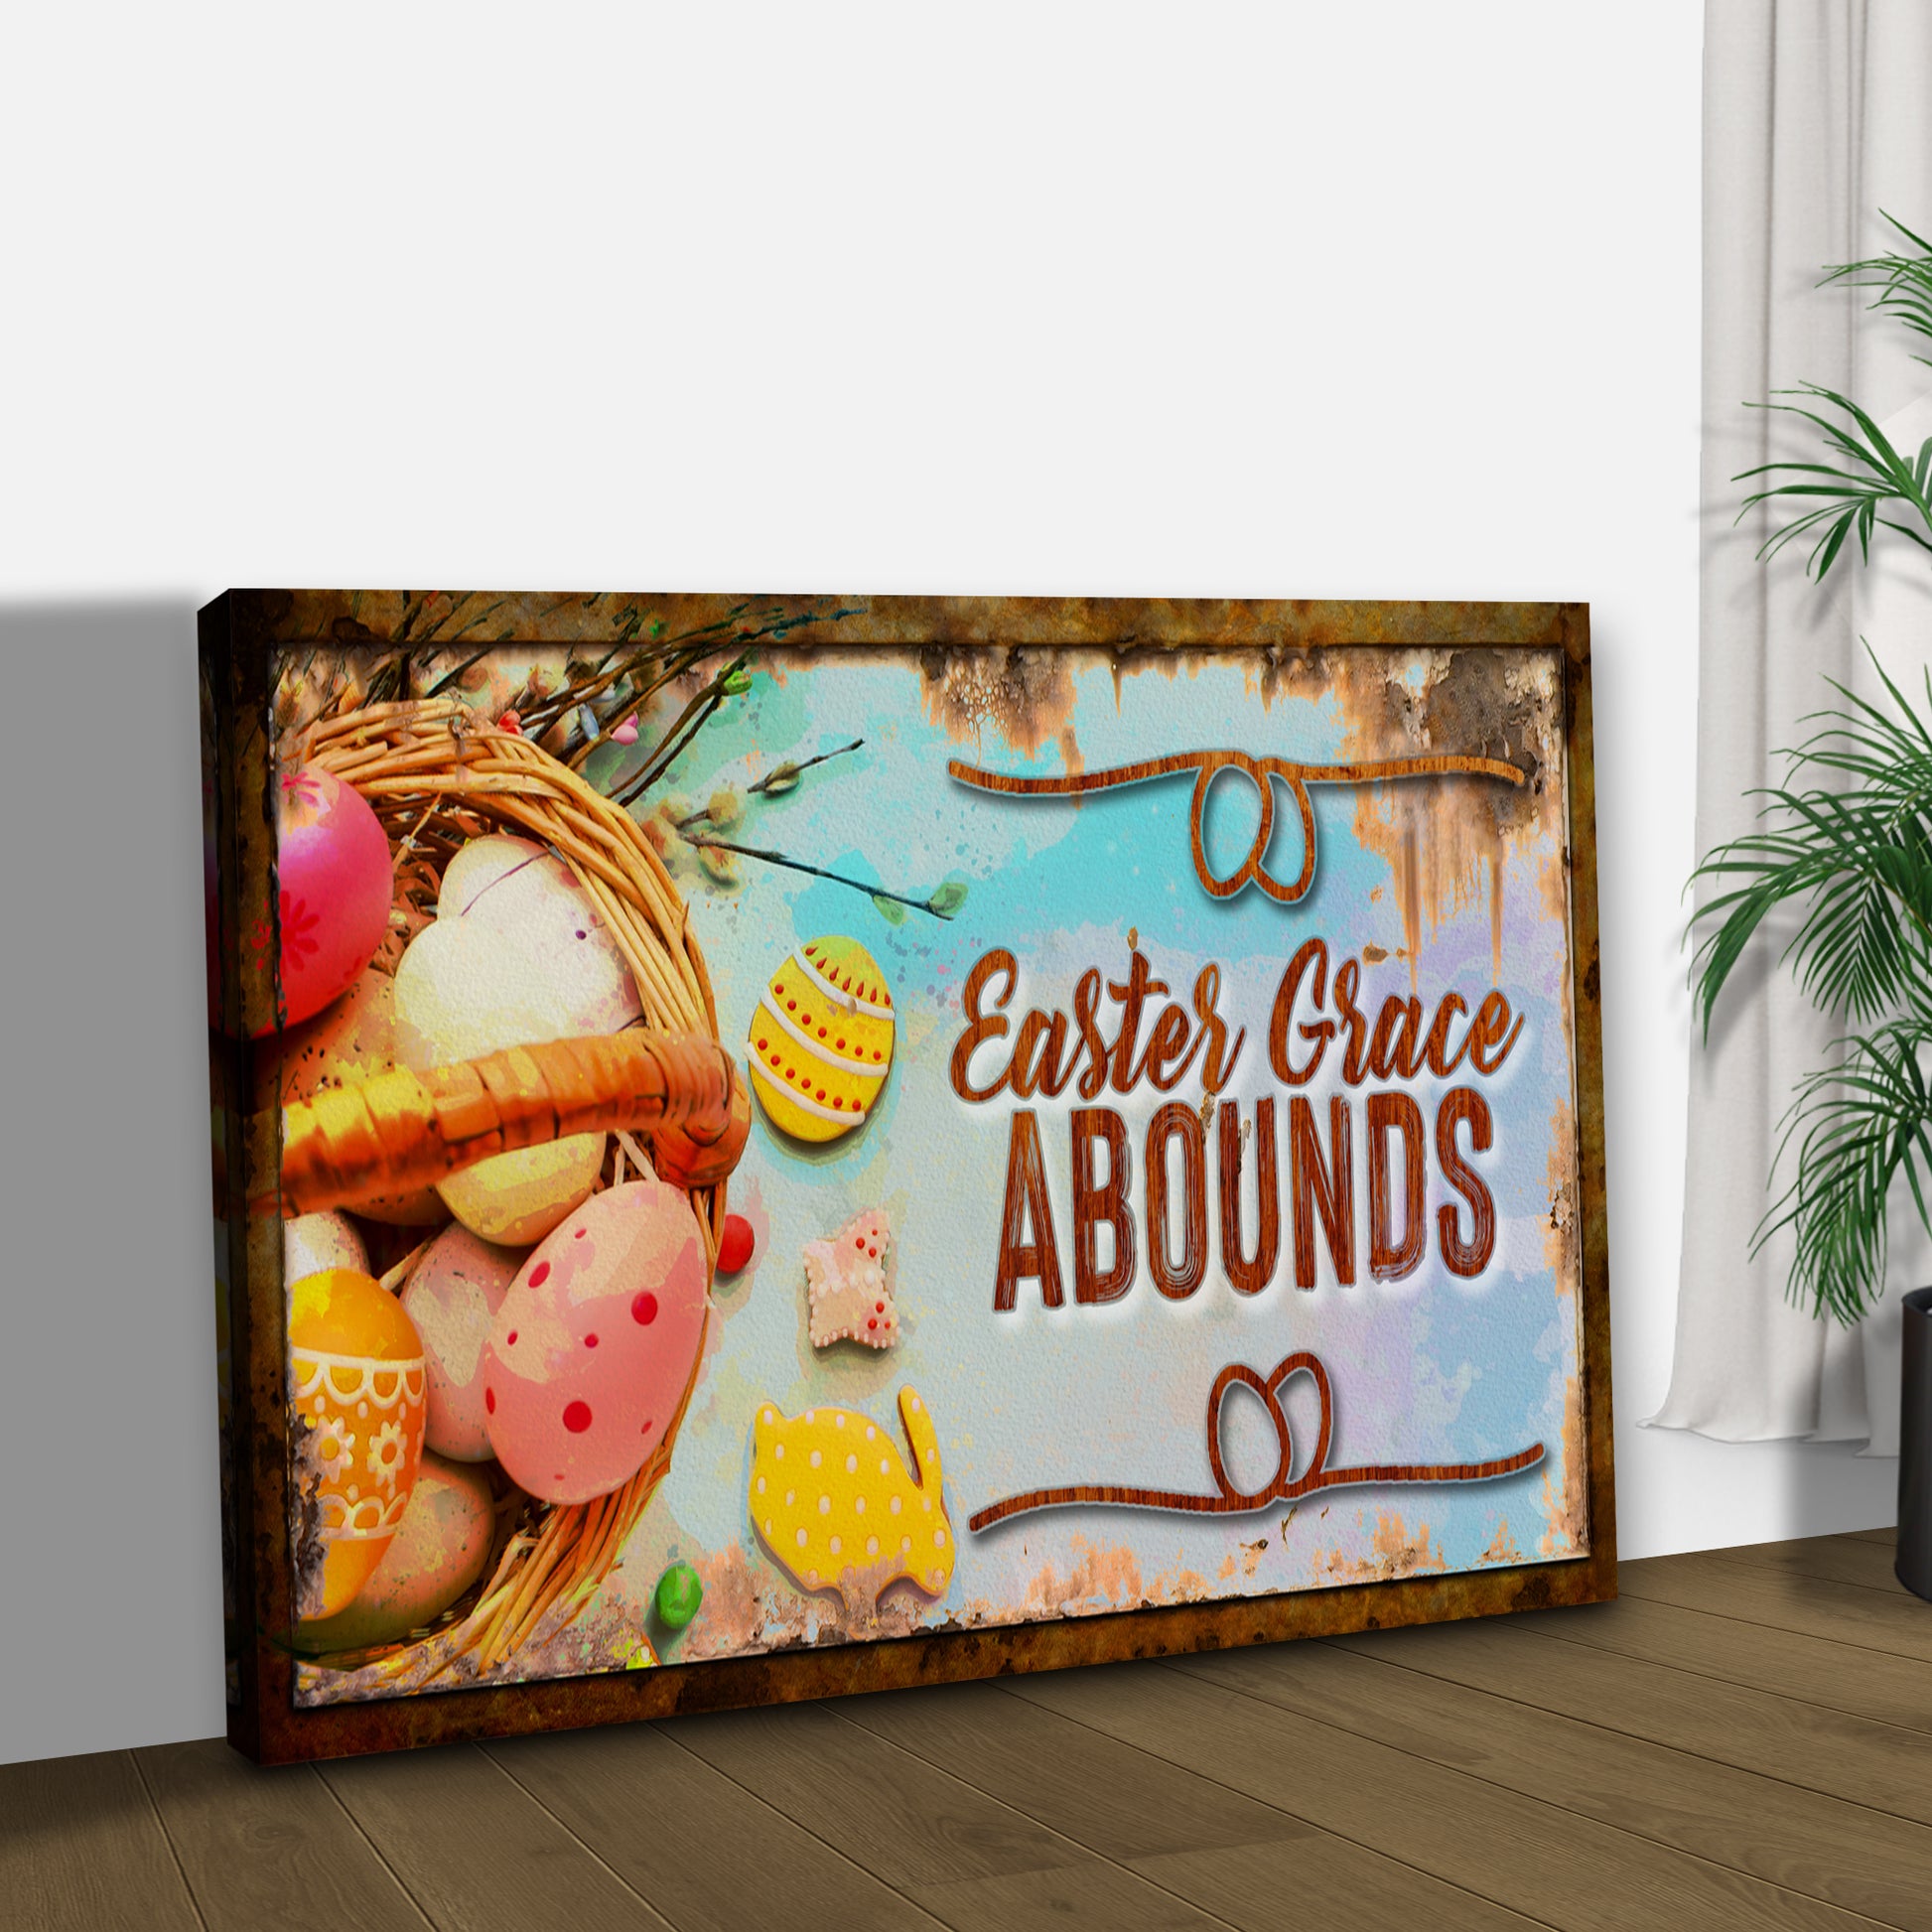 Easter Grace Abounds Sign Style 2 - Image by Tailored Canvases